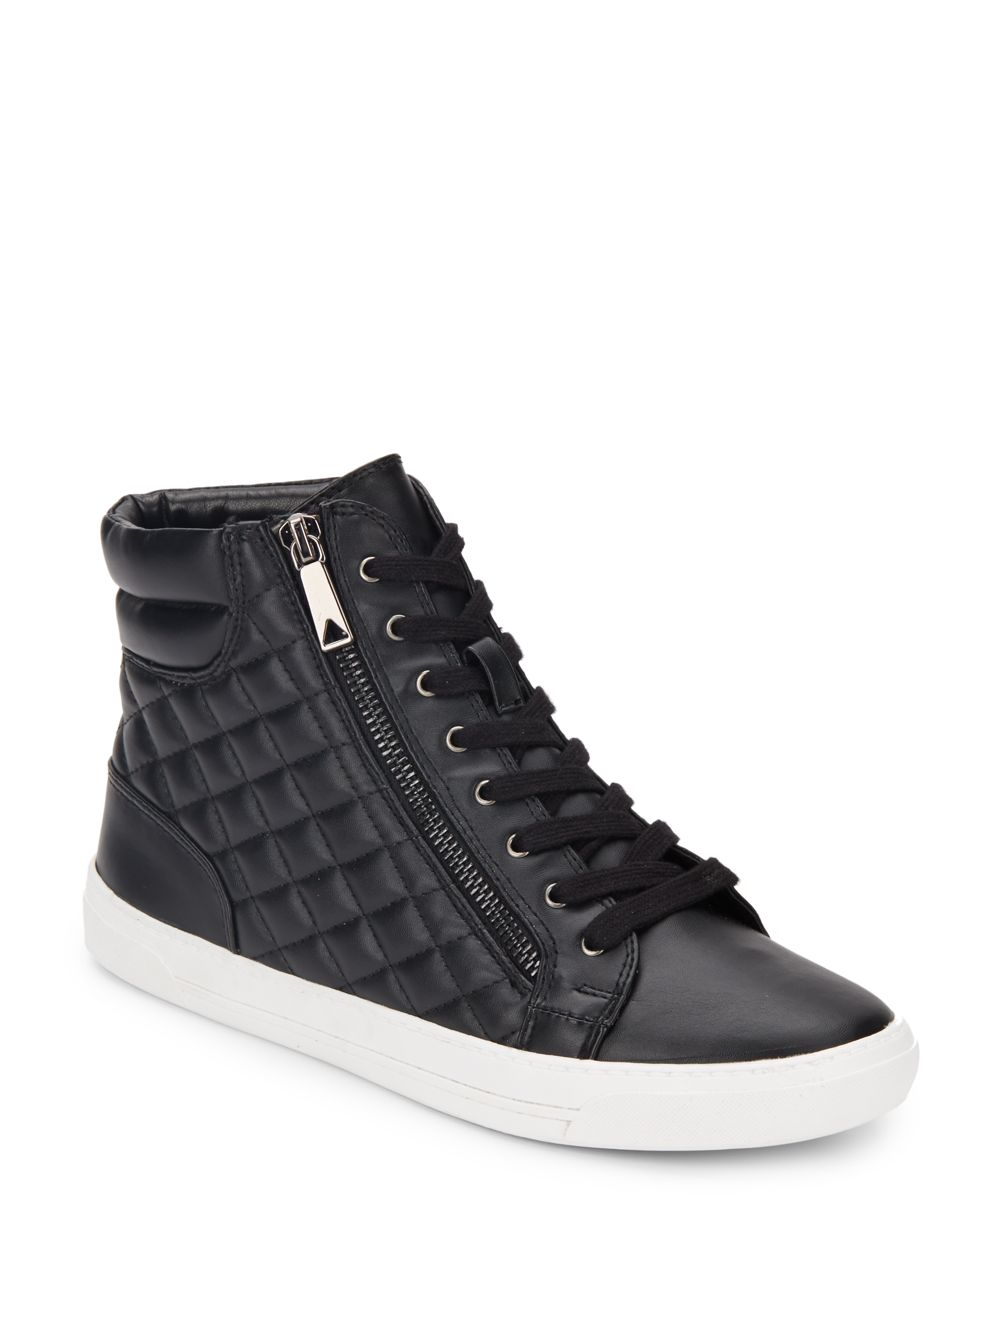 Lyst - Dv By Dolce Vita Sybill Quilted Pleather High-Top Sneakers in Black